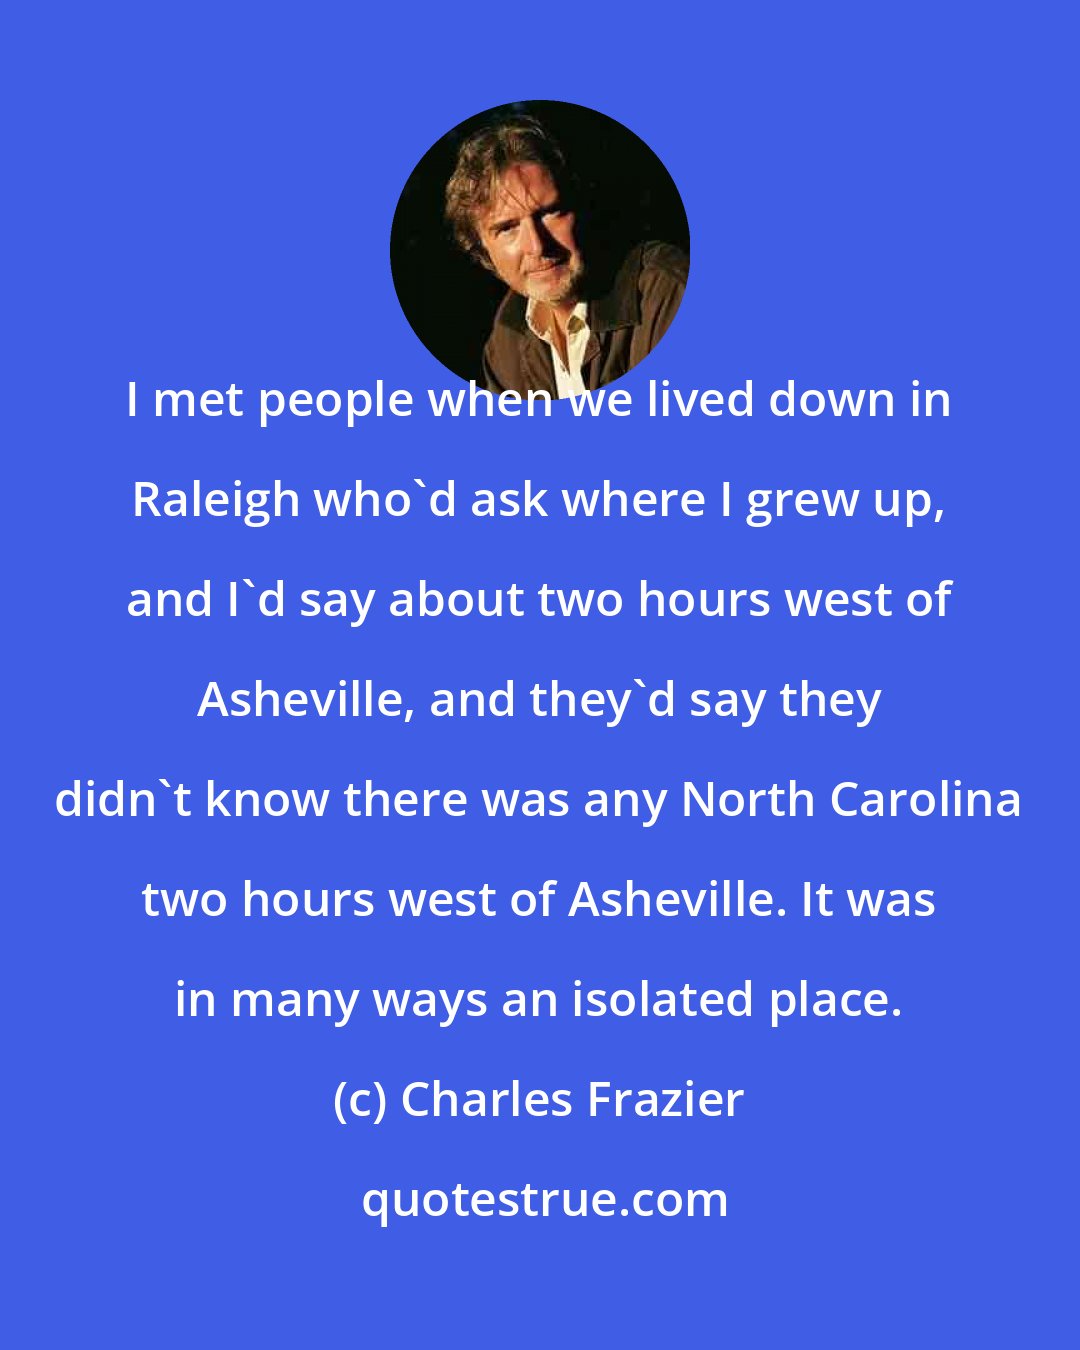 Charles Frazier: I met people when we lived down in Raleigh who'd ask where I grew up, and I'd say about two hours west of Asheville, and they'd say they didn't know there was any North Carolina two hours west of Asheville. It was in many ways an isolated place.